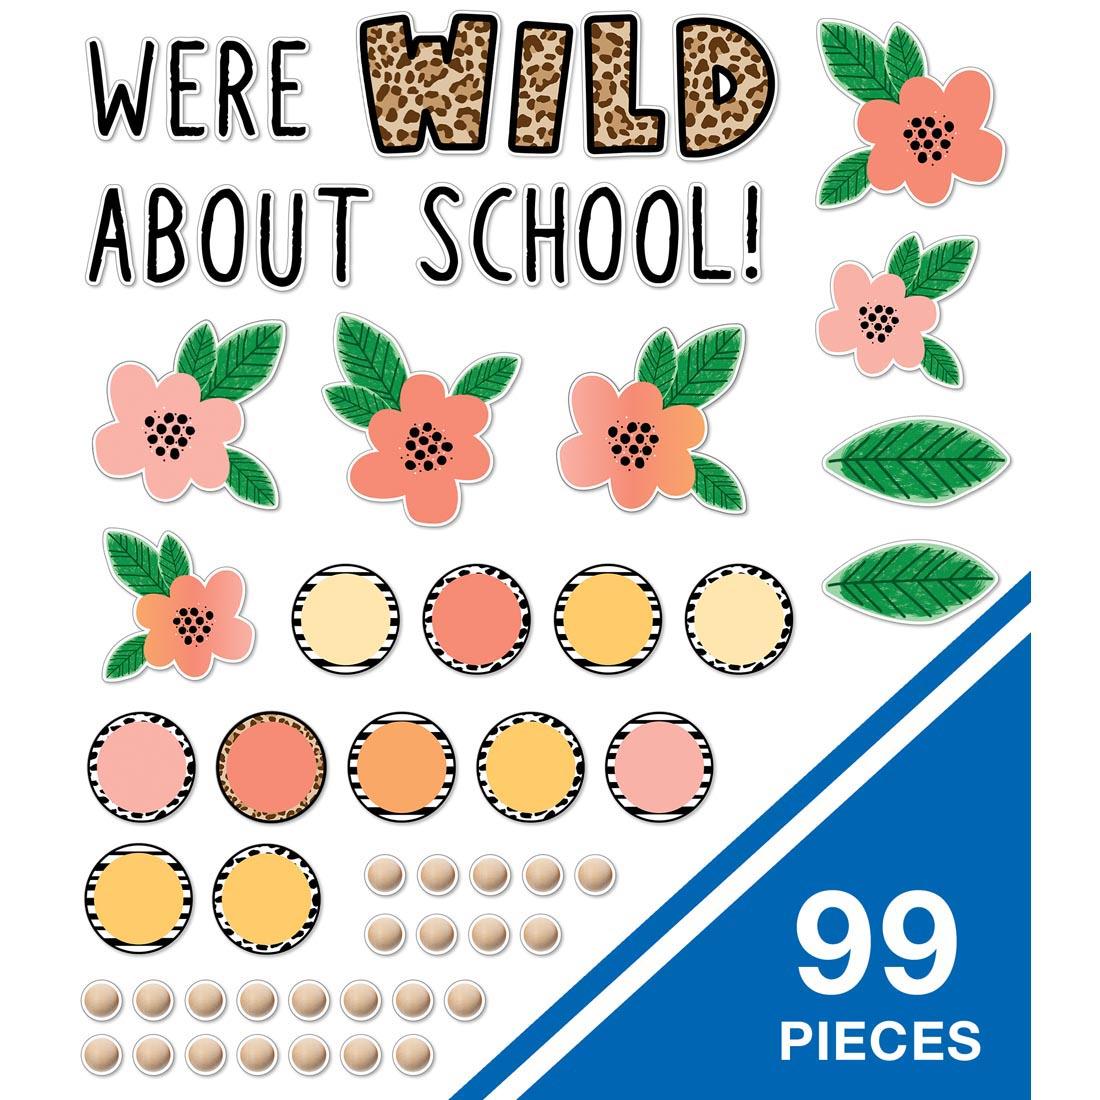 Pieces from the Simply Safari We Are Wild About School Bulletin Board Set By Carson Dellosa, noting there are 99 pieces in all